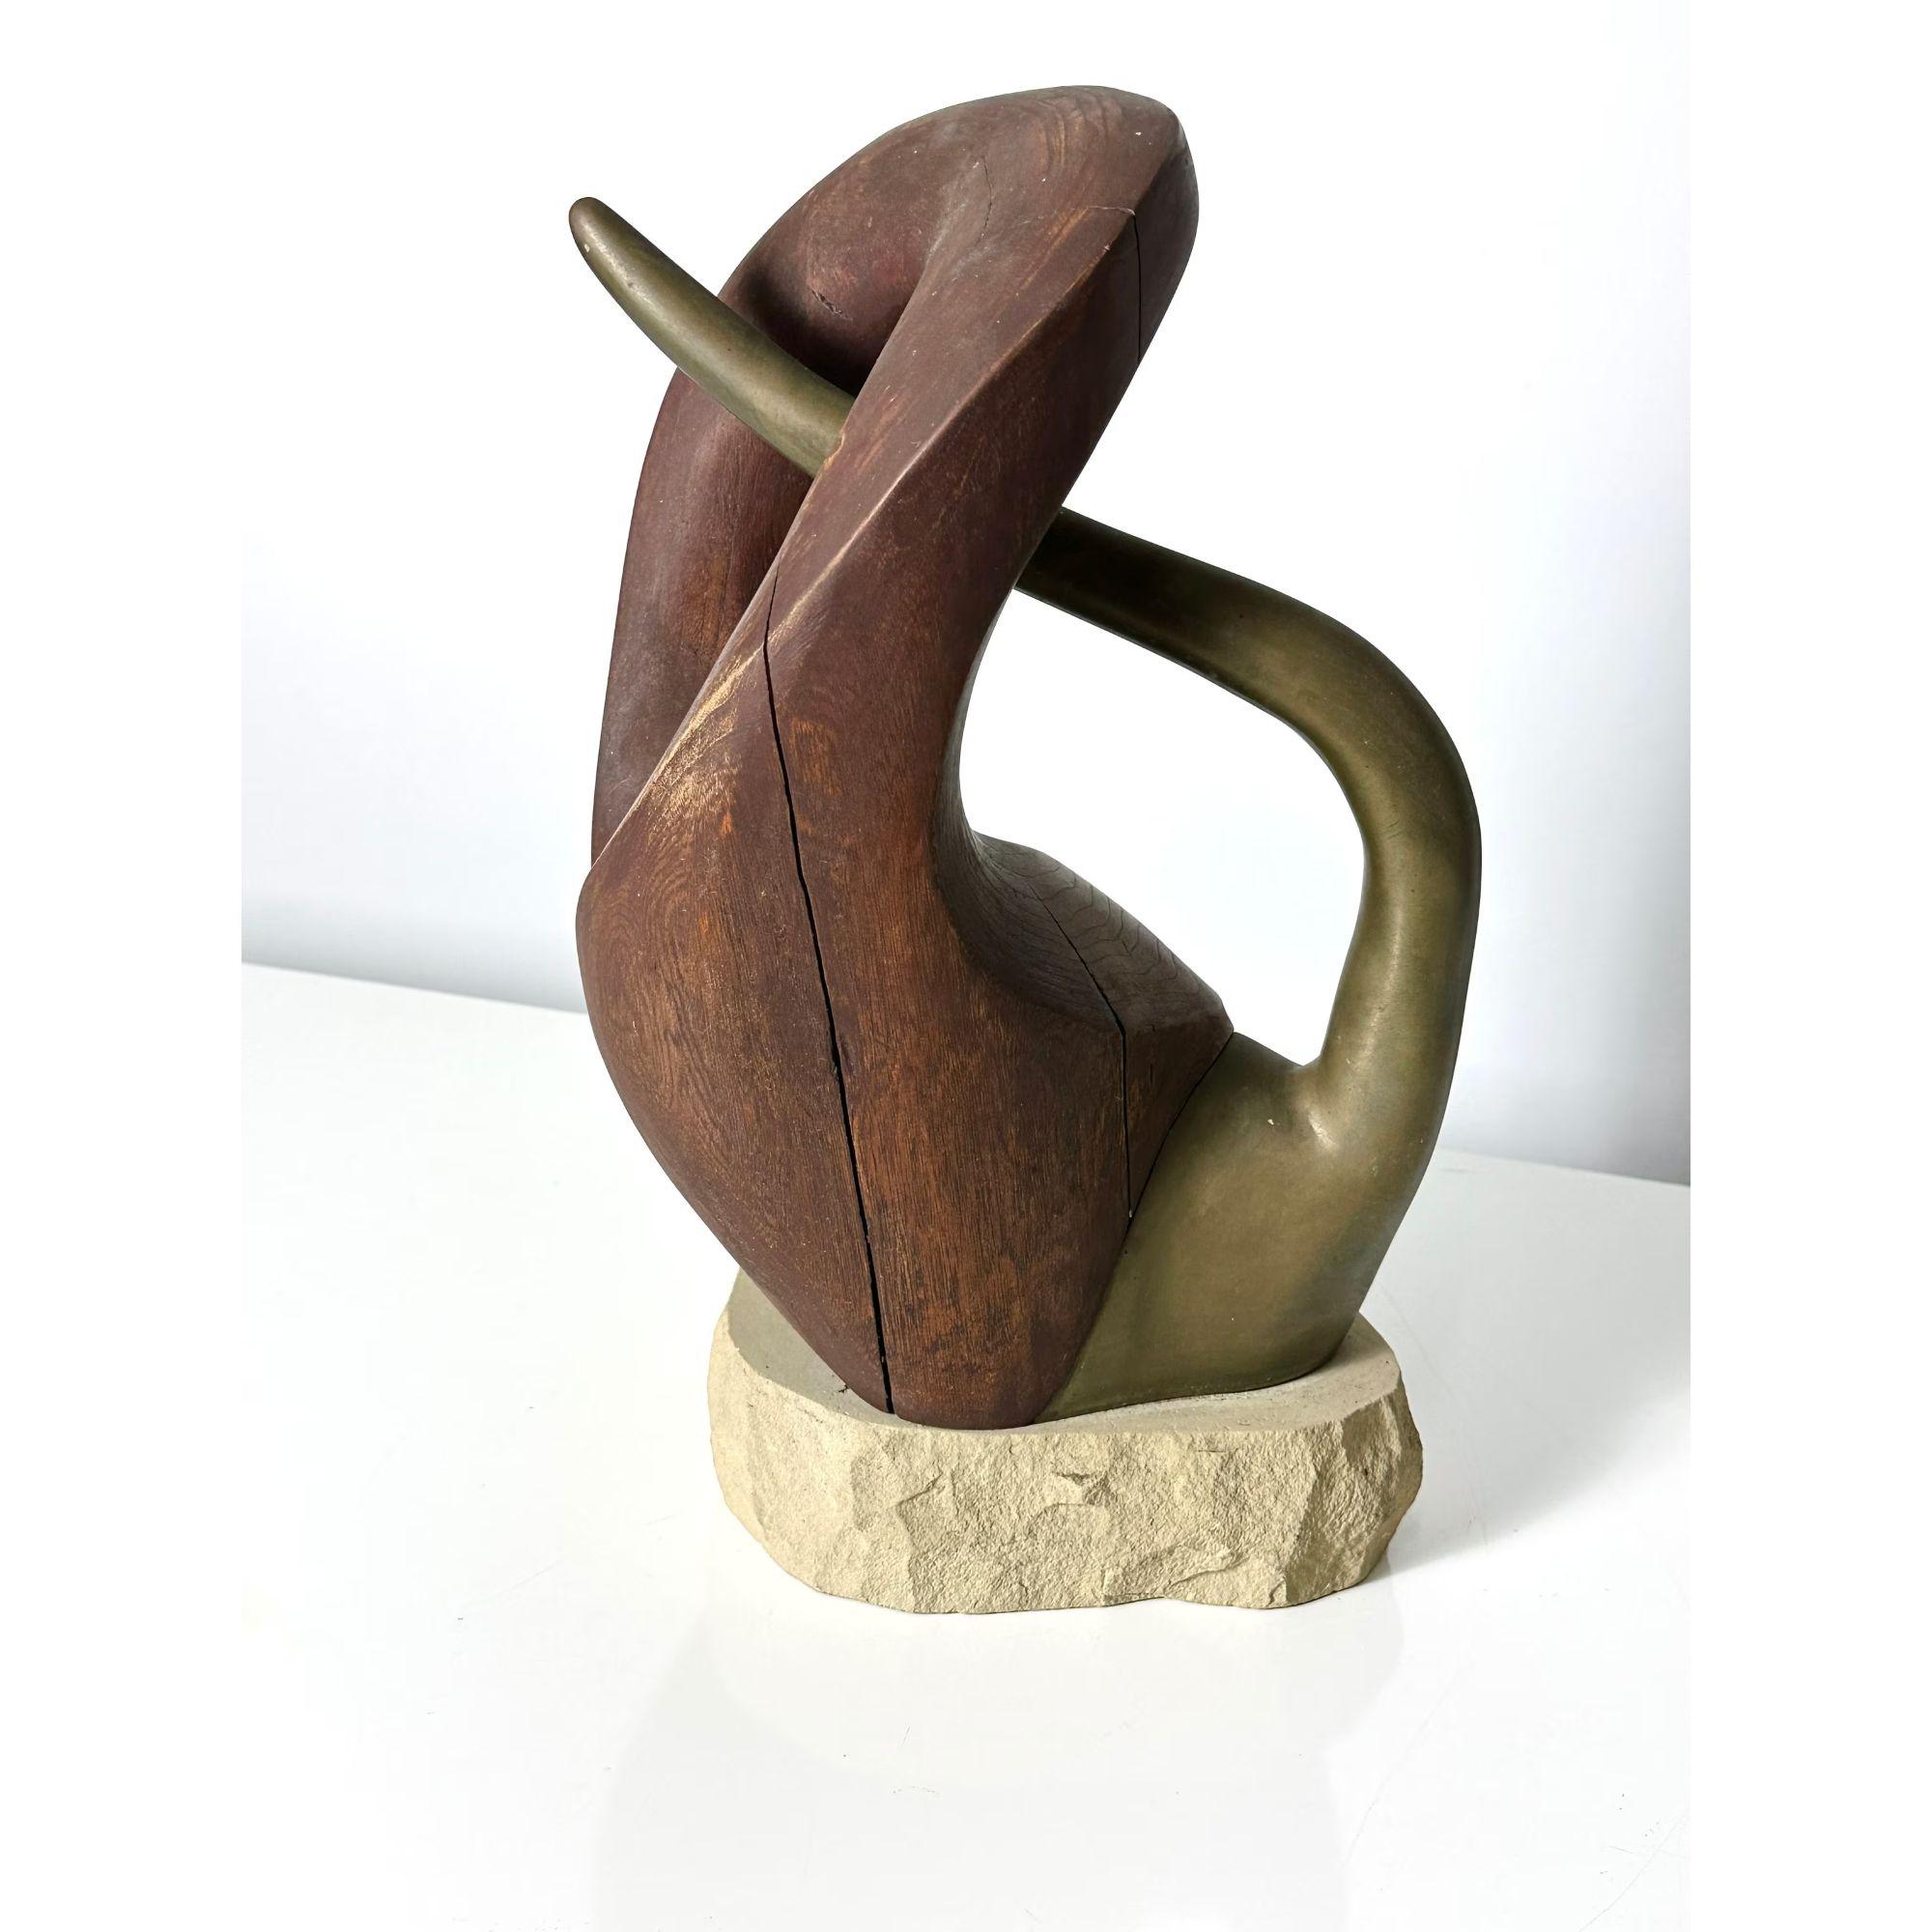 American Mid Century Modern Abstract Biomorphic Wood & Bronze Sculpture circa 1960s For Sale